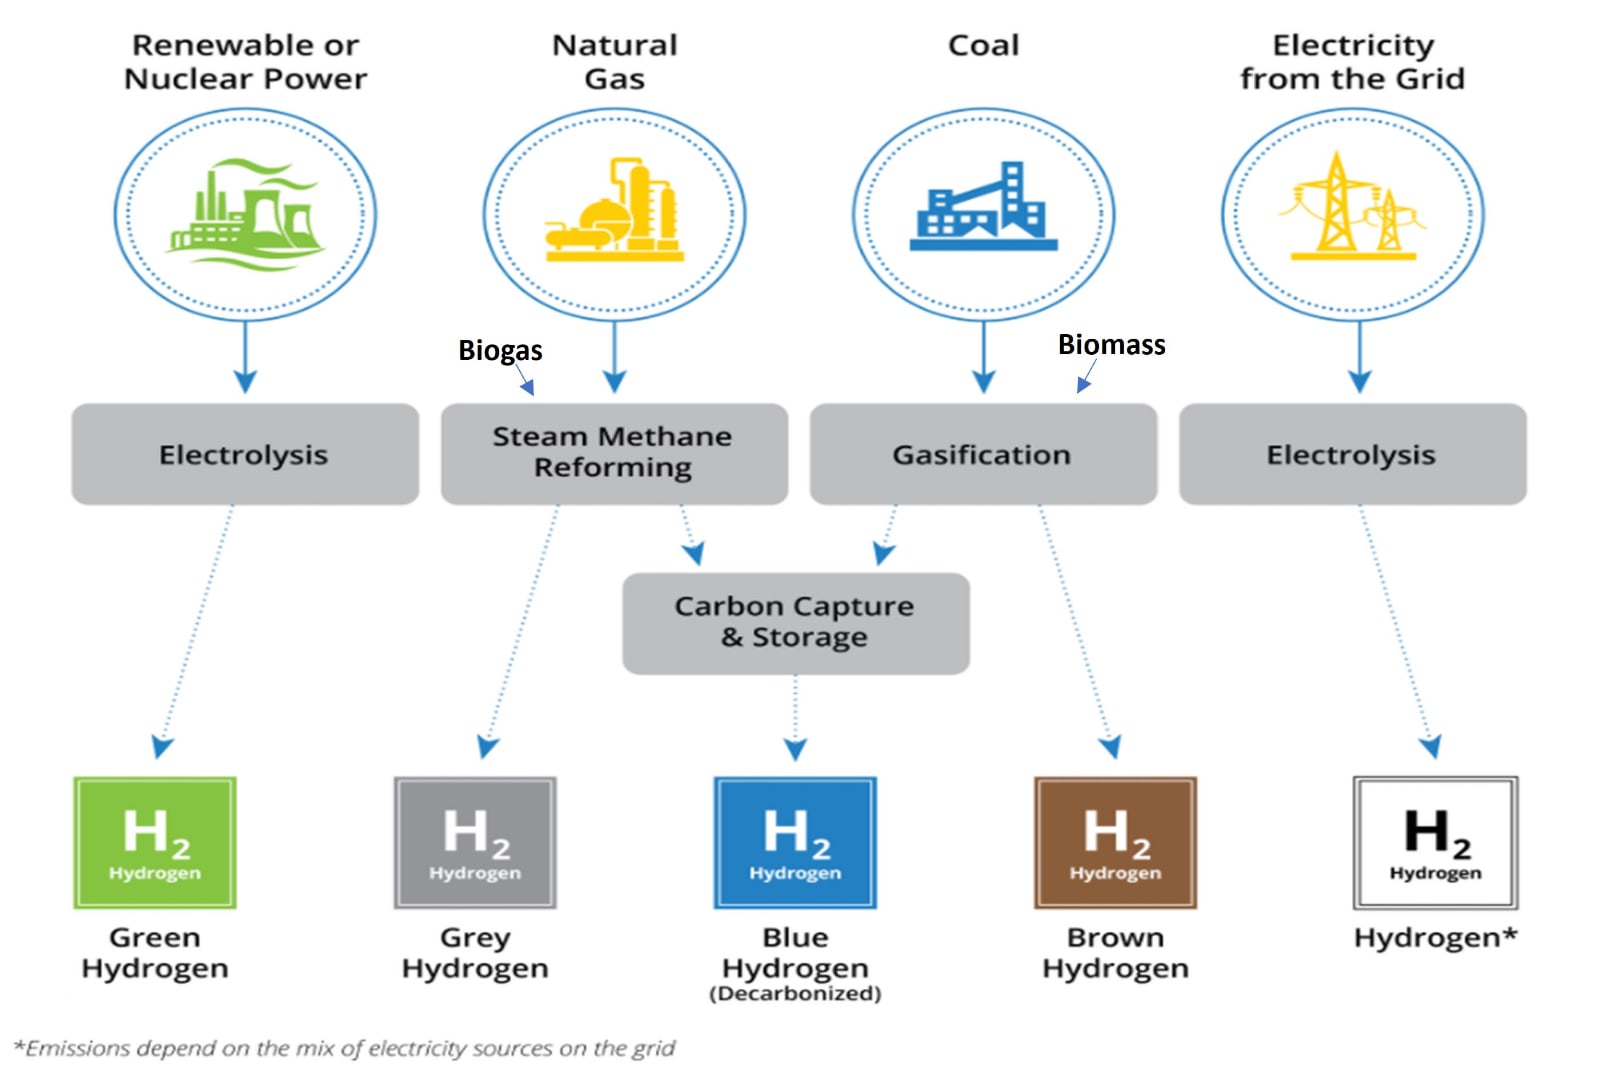 uses of hydrogen